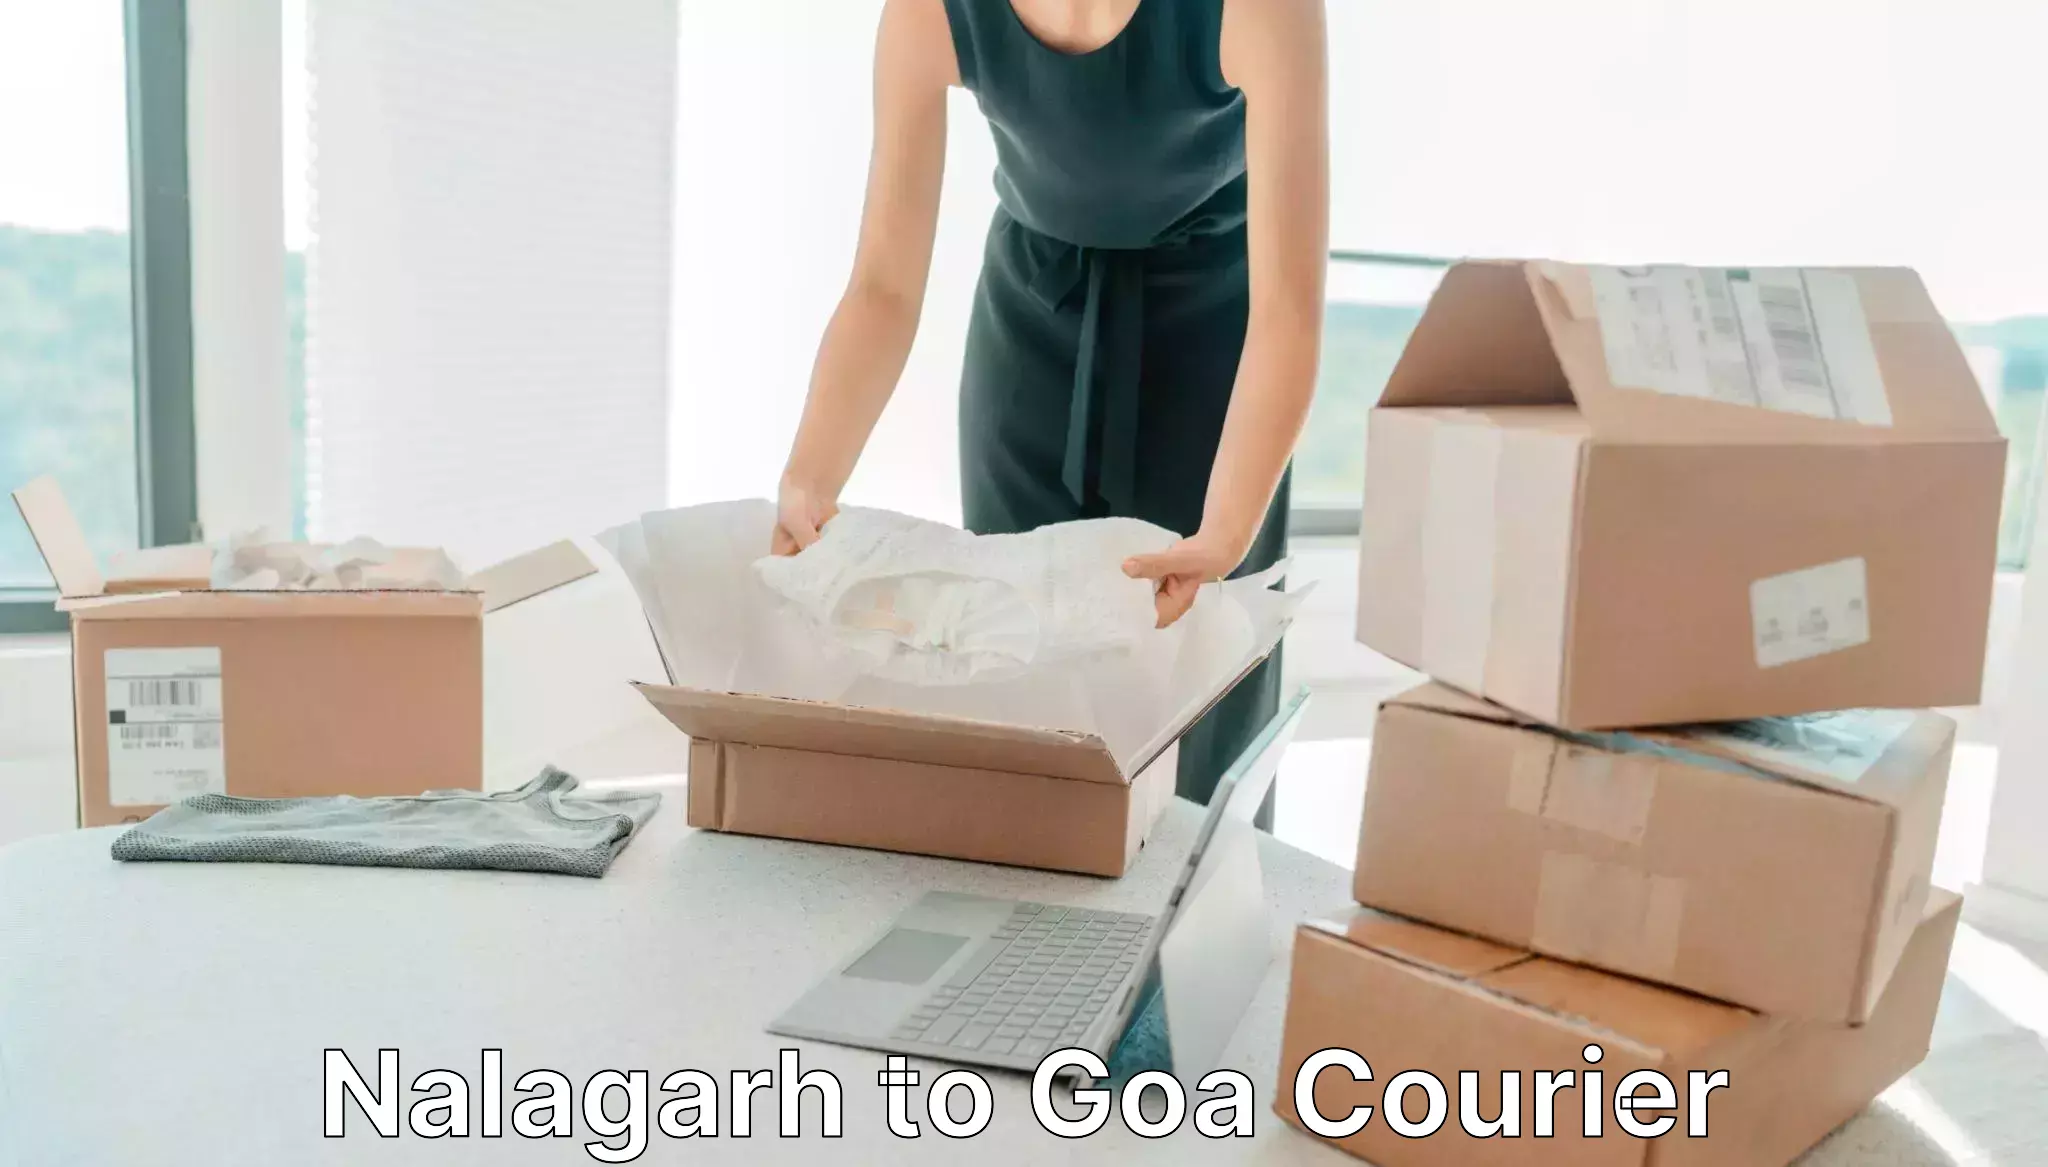 Parcel service for businesses Nalagarh to Goa